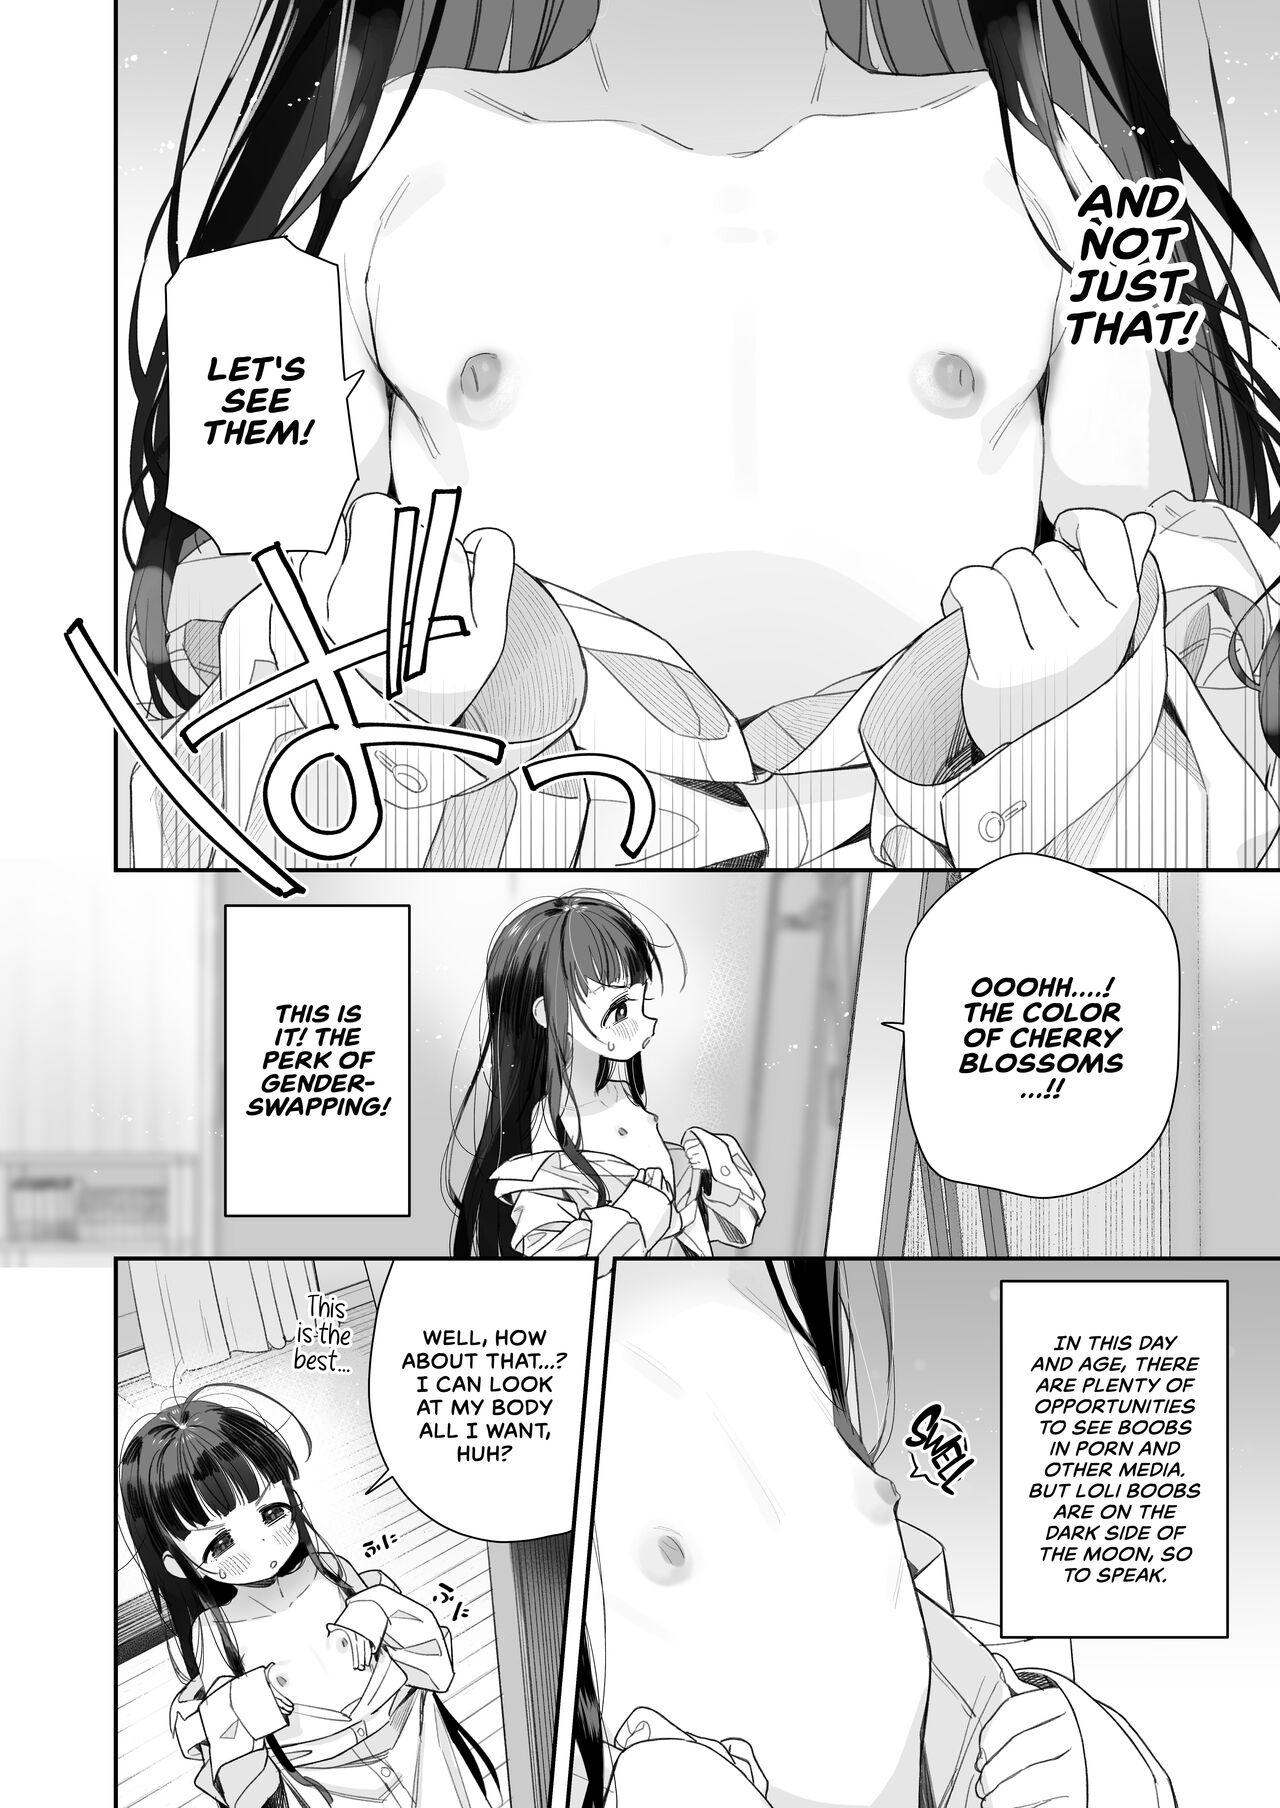 Free Porn Amateur [Asunaro Neat. (Ronna)] TS Loli Oji-san no Bouken Onanie Hen | The Adventures of an Old Man Who Was Gender-Swapped Into a Loli ~Masturbation Chapter~ [English] [CulturedCommissions] [Digital] - Original Travesti - Page 7